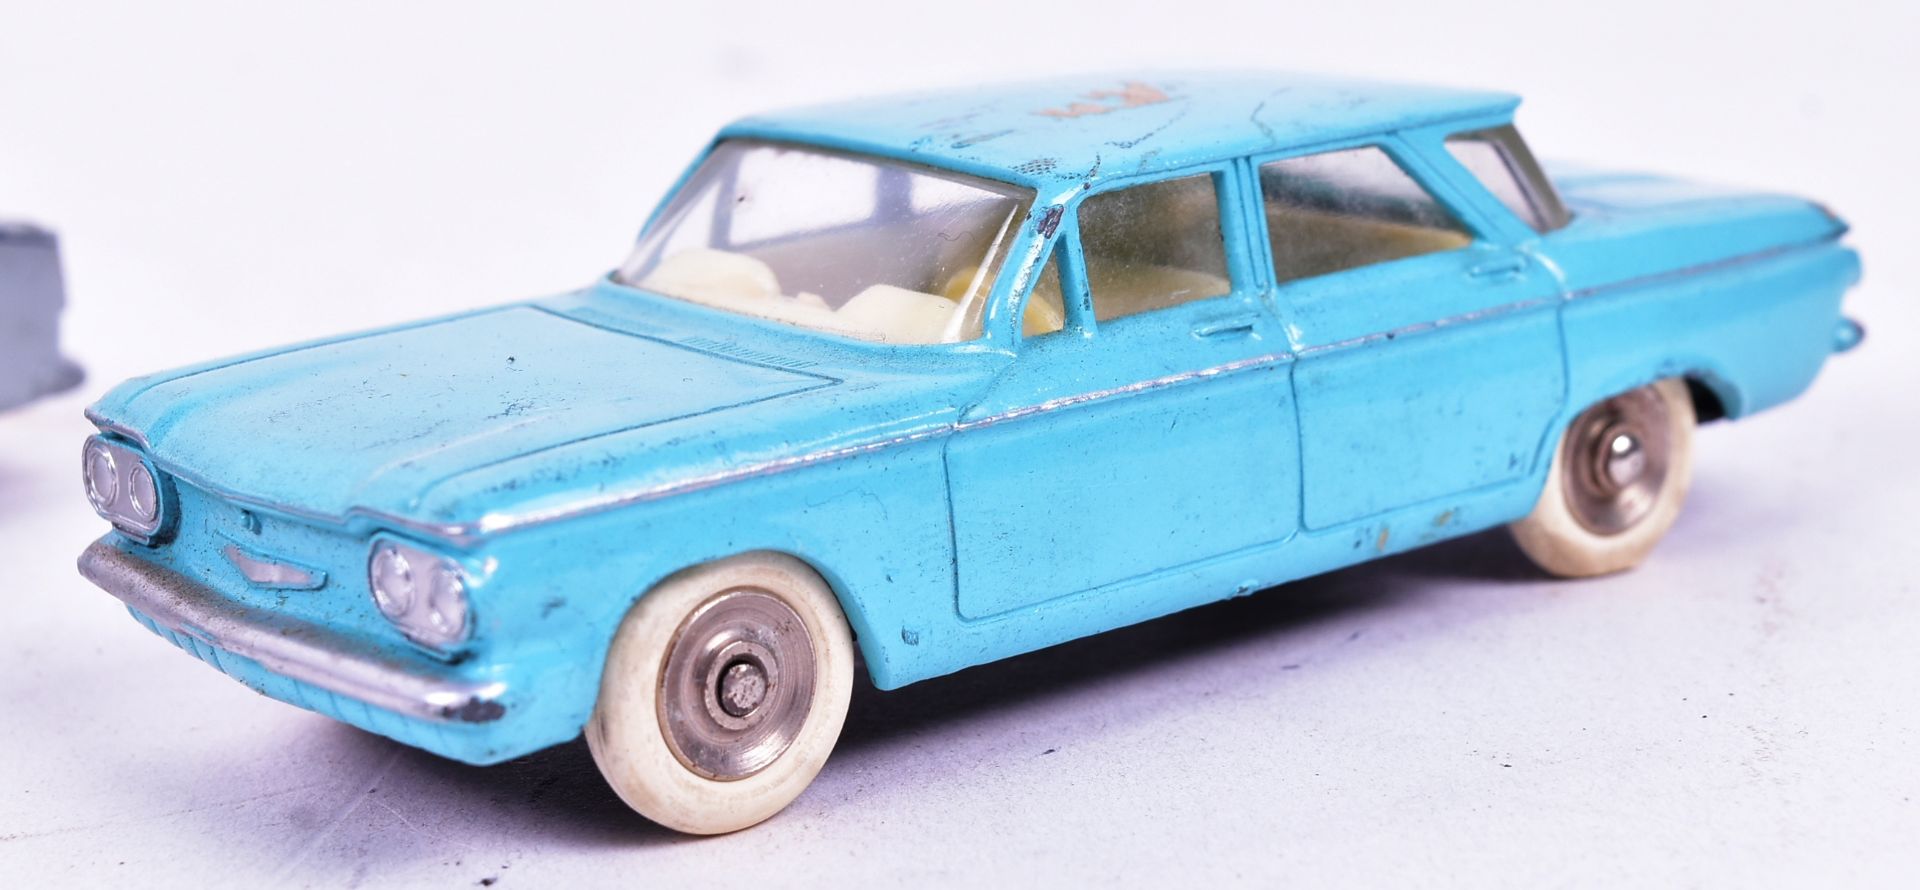 DIECAST - FRENCH DINKY TOYS - PEUGEOT 403 & CHEVROLET CORVAIR - Image 3 of 6